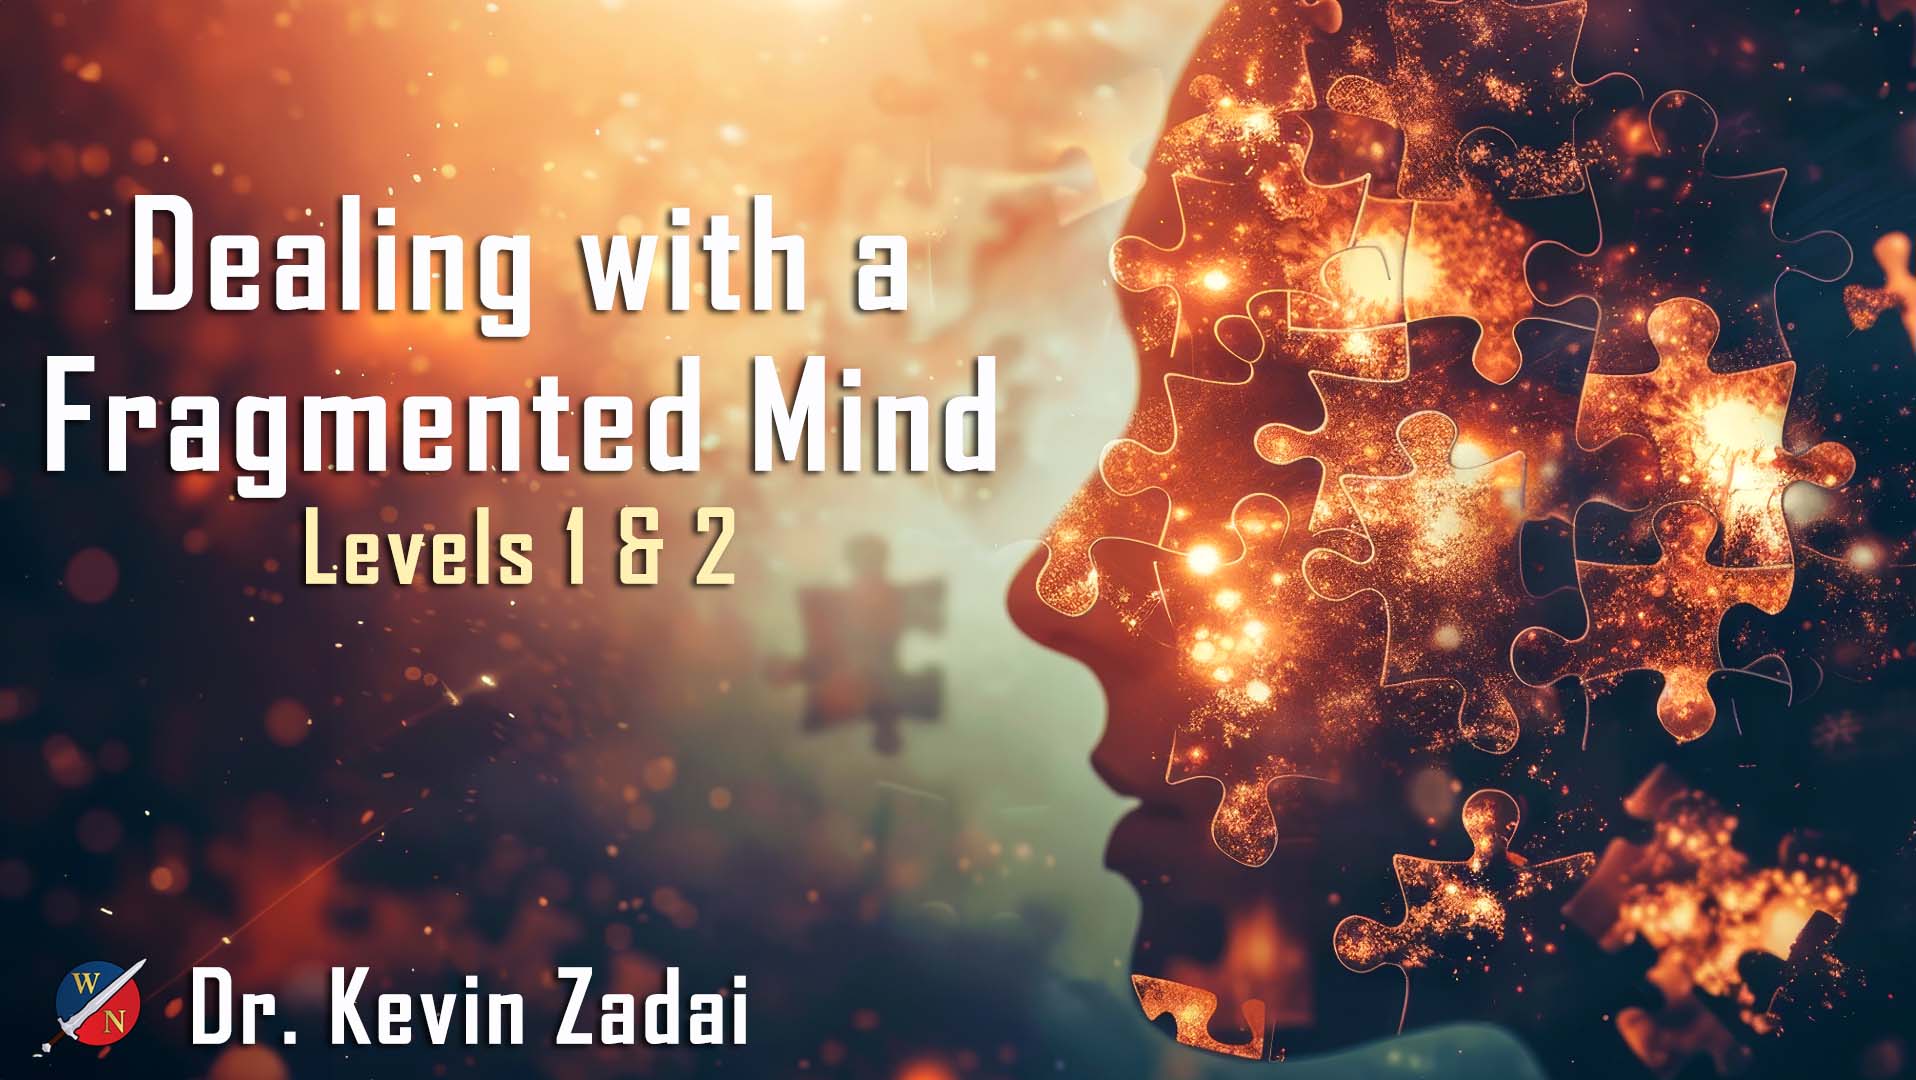 Dealing with a Fragmented Mind with Dr. Kevin Zadai - course bundle image